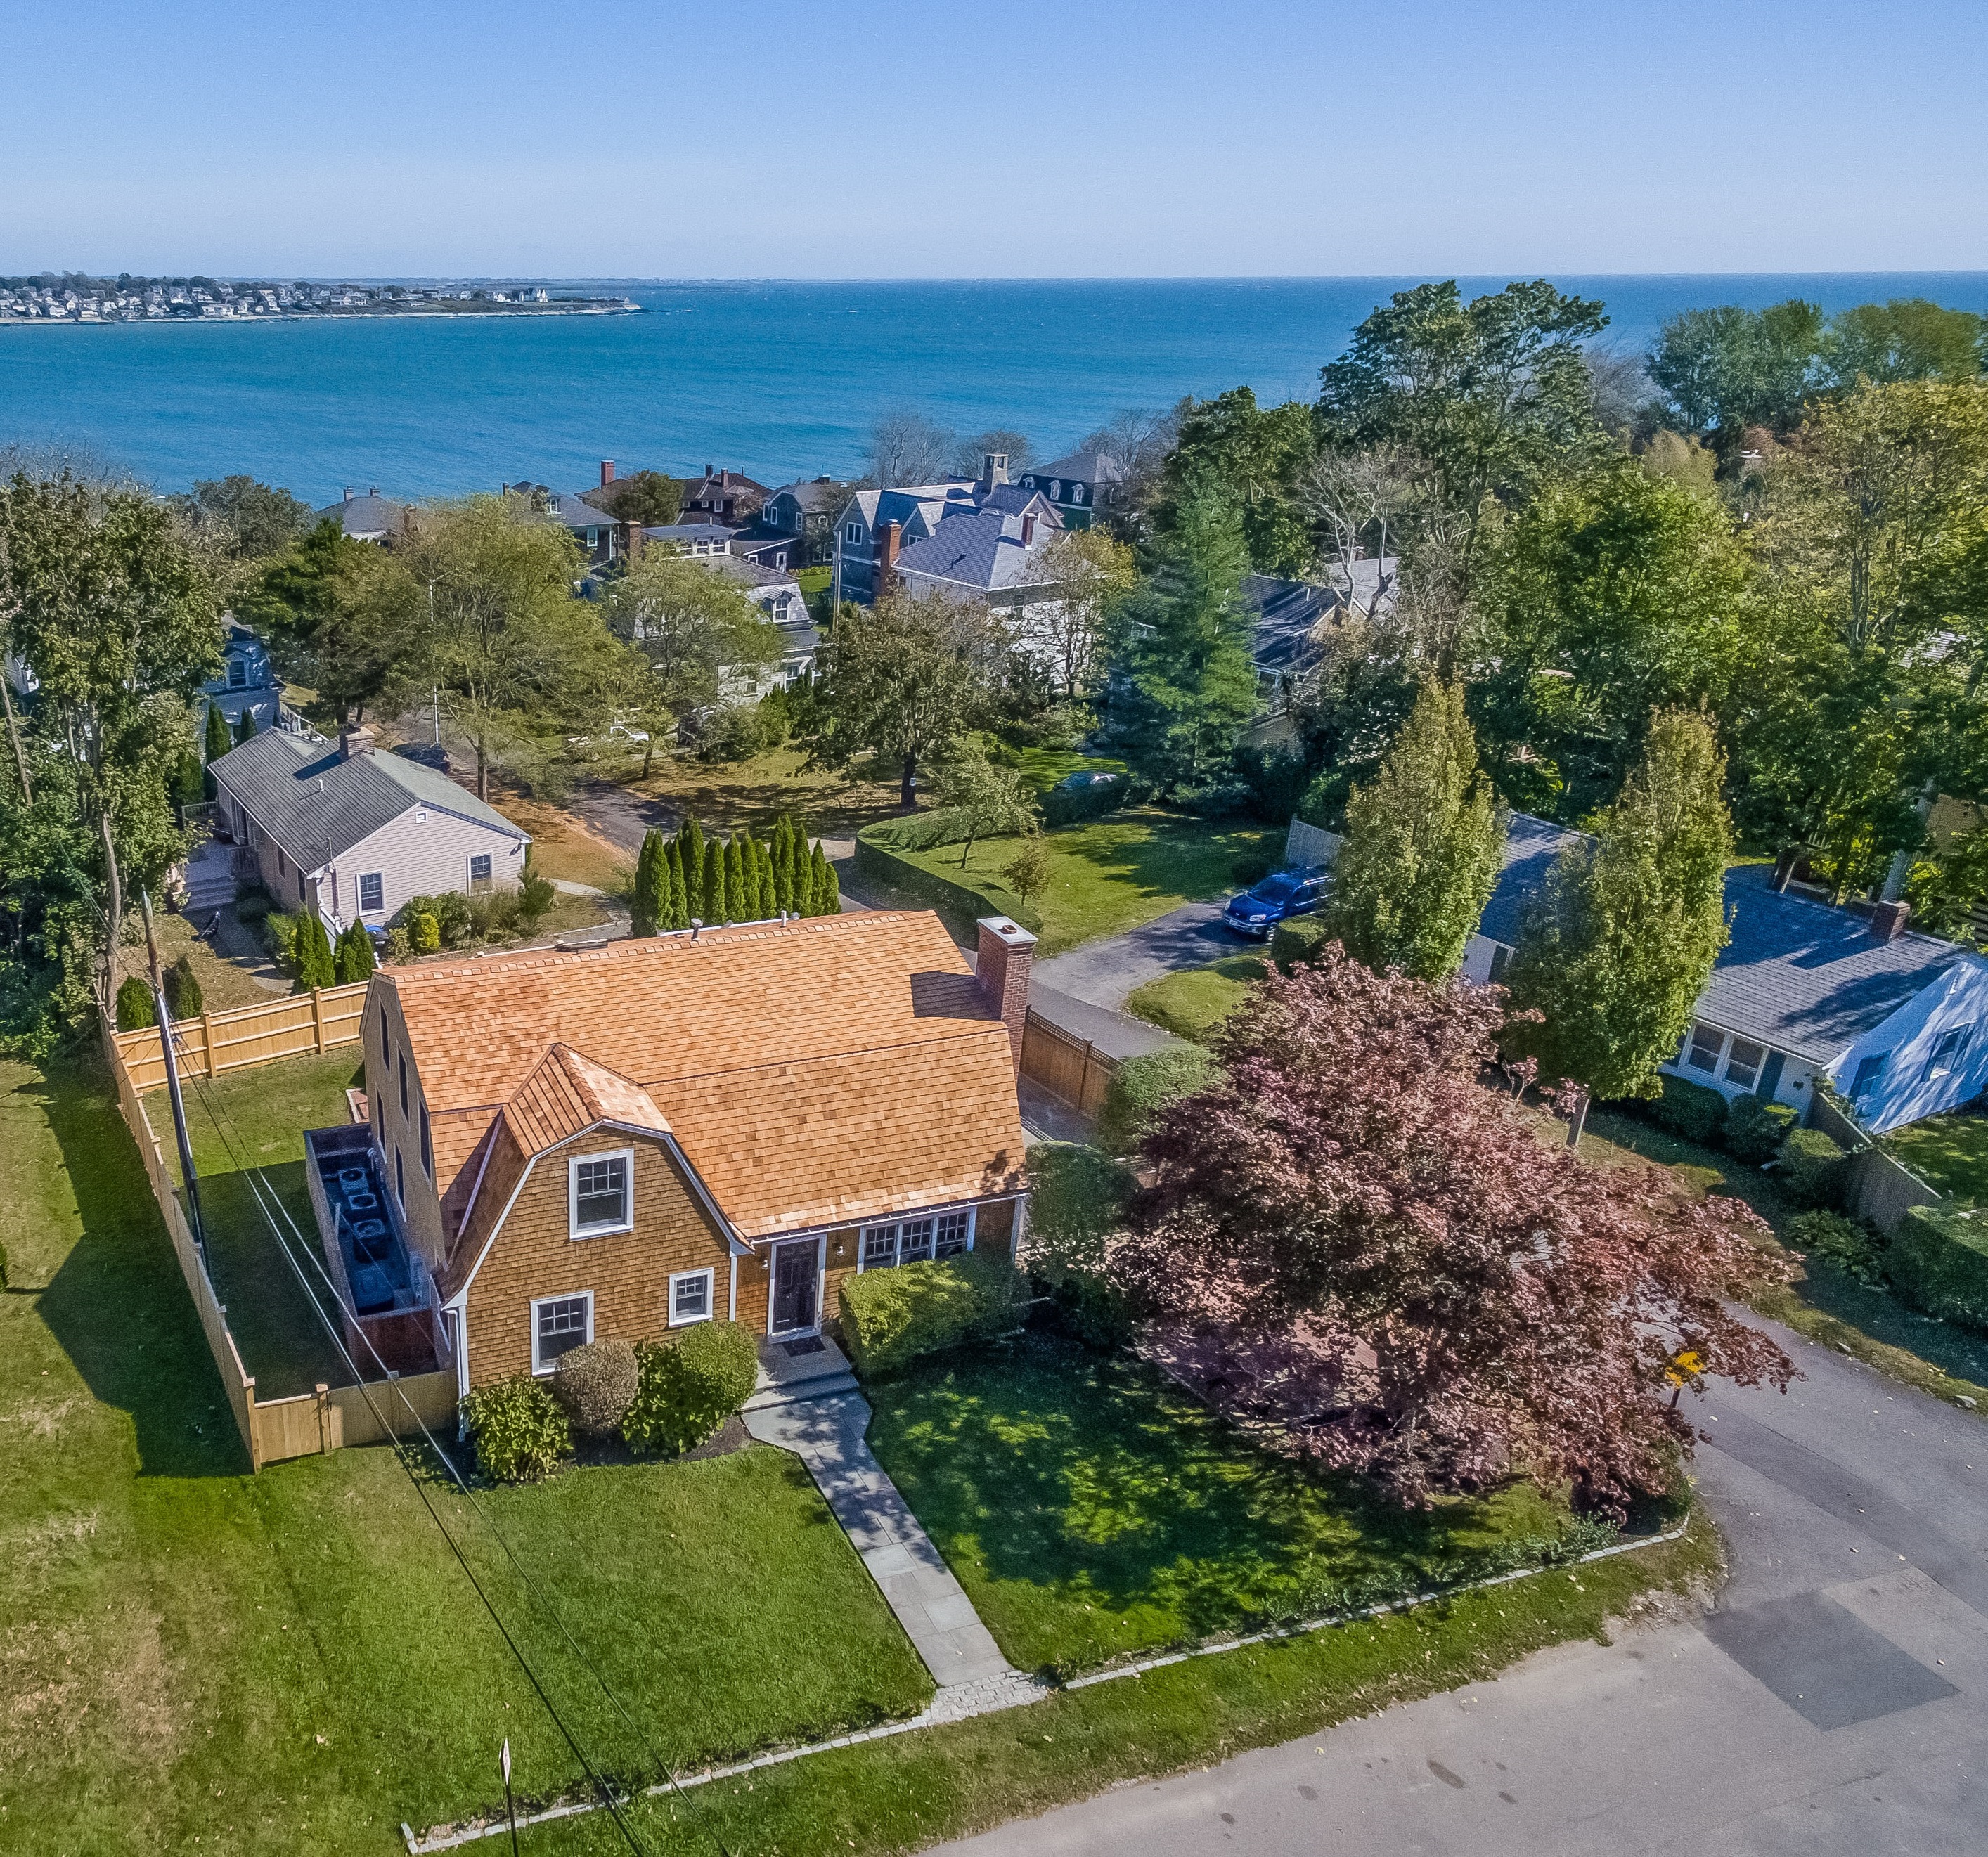 What’s Up Newp : Seacliff Cottage sells for $1.24 million